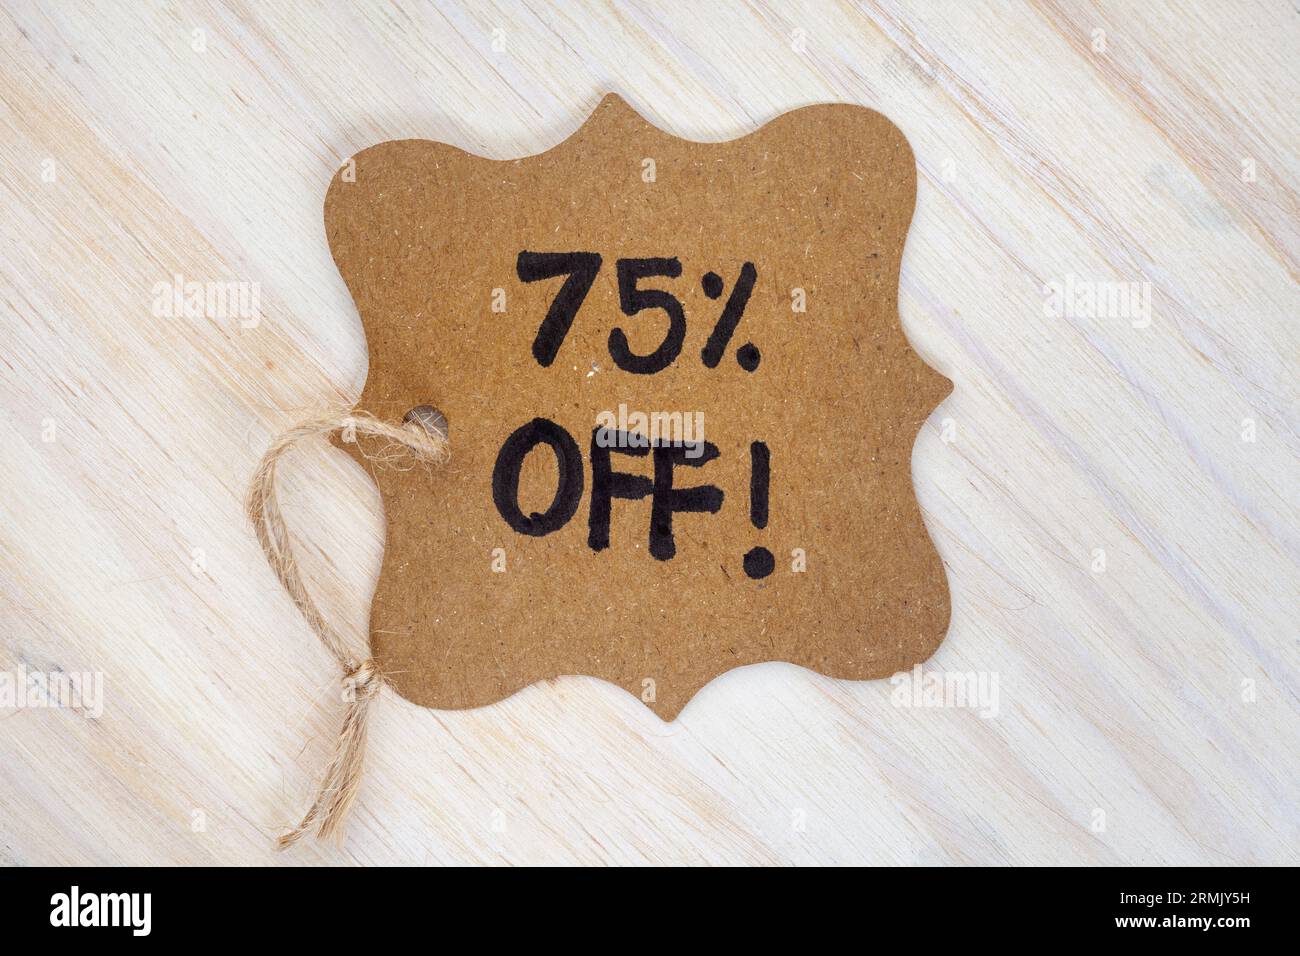 75% off written on vintage gift tag Stock Photo